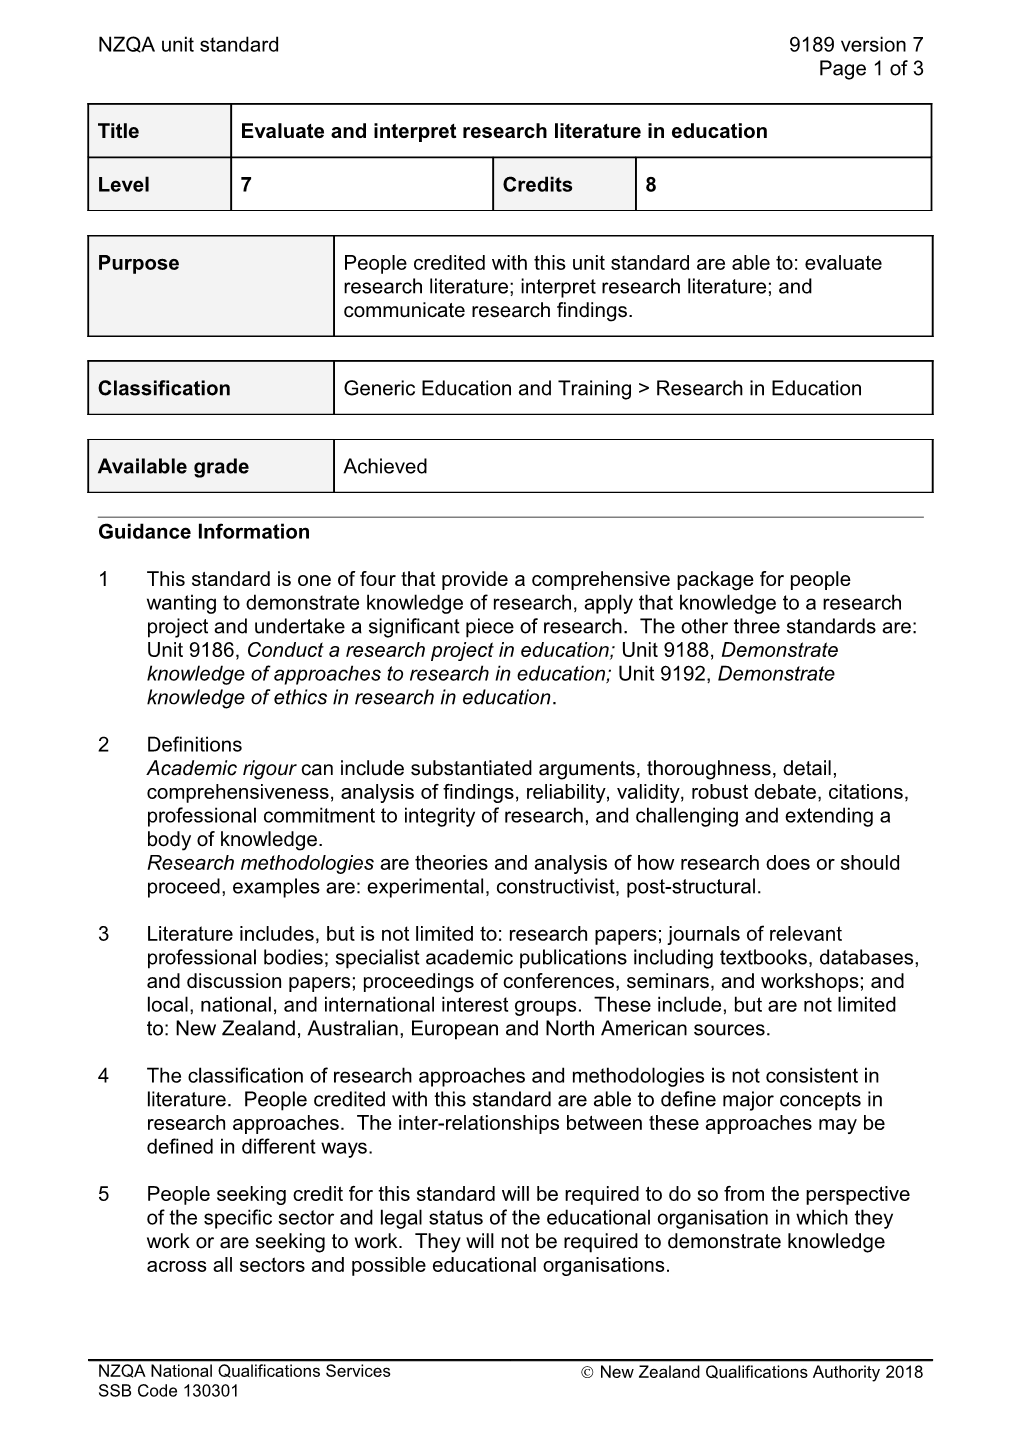 9189 Evaluate and Interpret Research Literature in Education